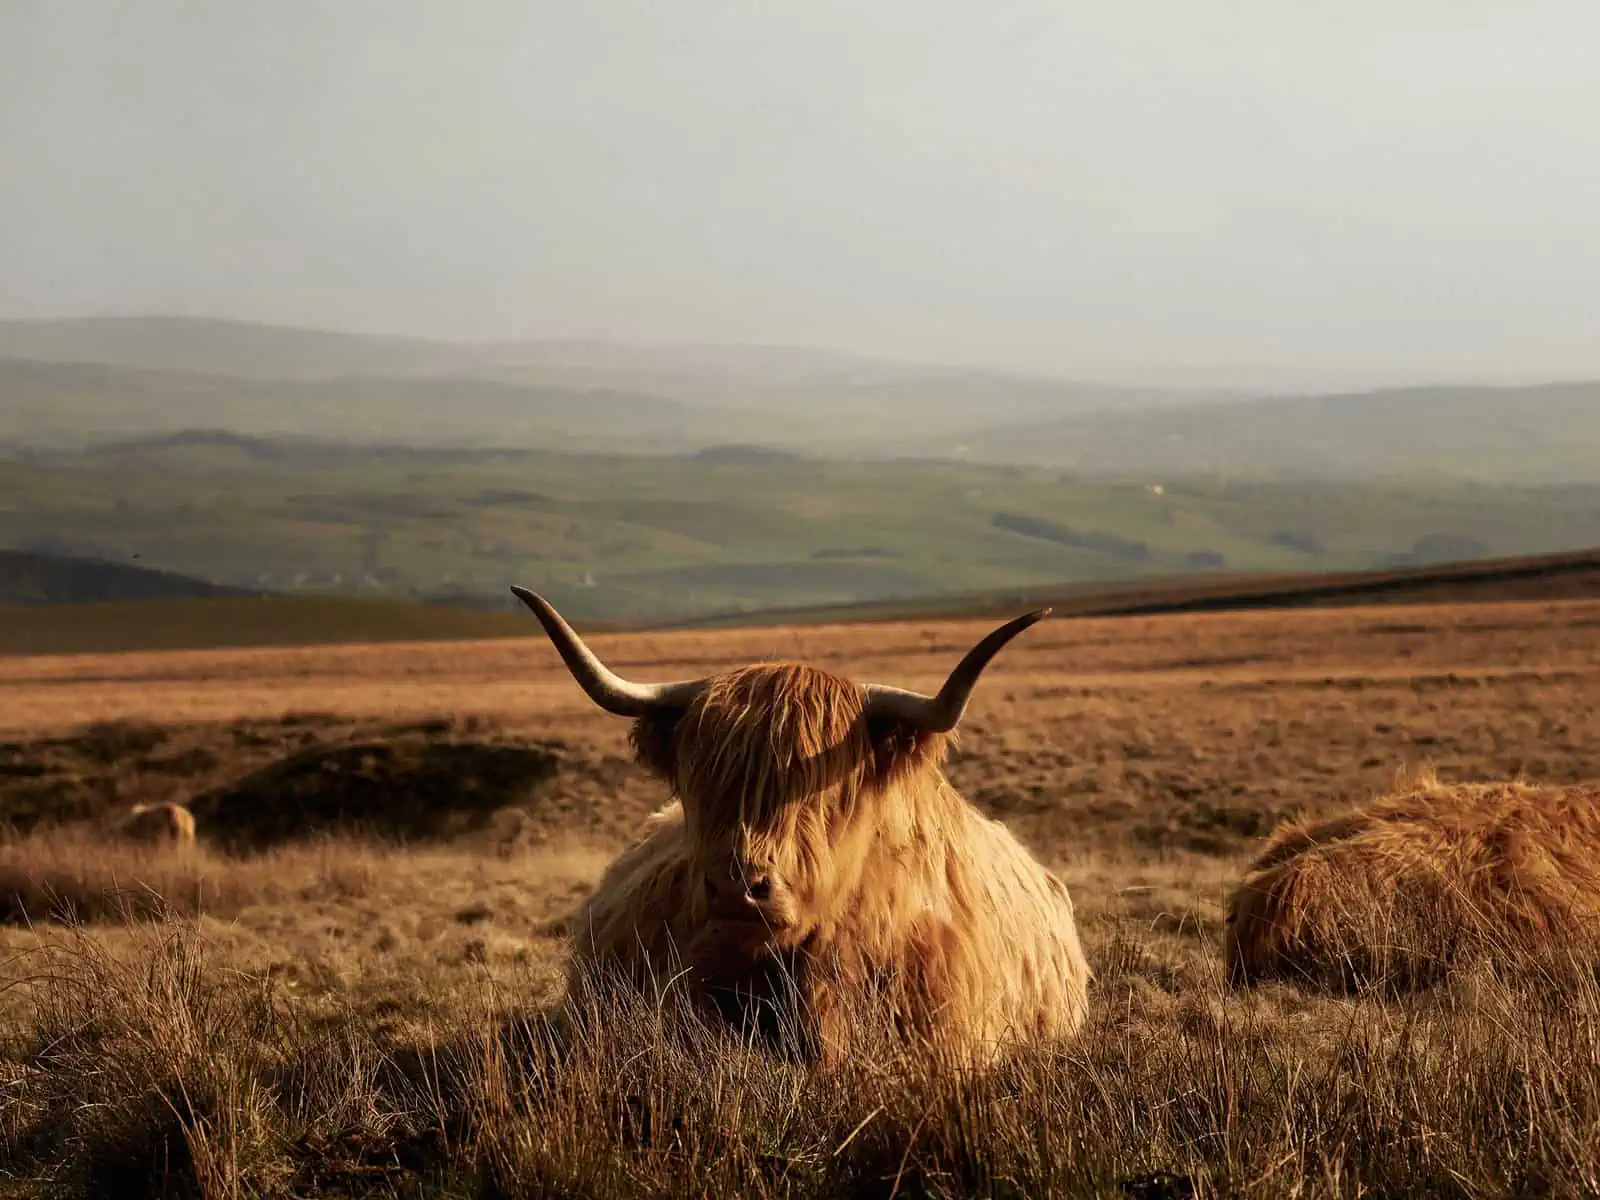 Image description: A landscape image. A highland cow sits looking straight to the camera in the centre of the frame. Around the central how are other cows sleeping in the hills. The cow is orange/ginger and the grasses and hills that are bathed in golden light seem to compliment the creature. In the background are hazy hills and mountains and the sky is a dark grey/hazy - it looks toward sunset.